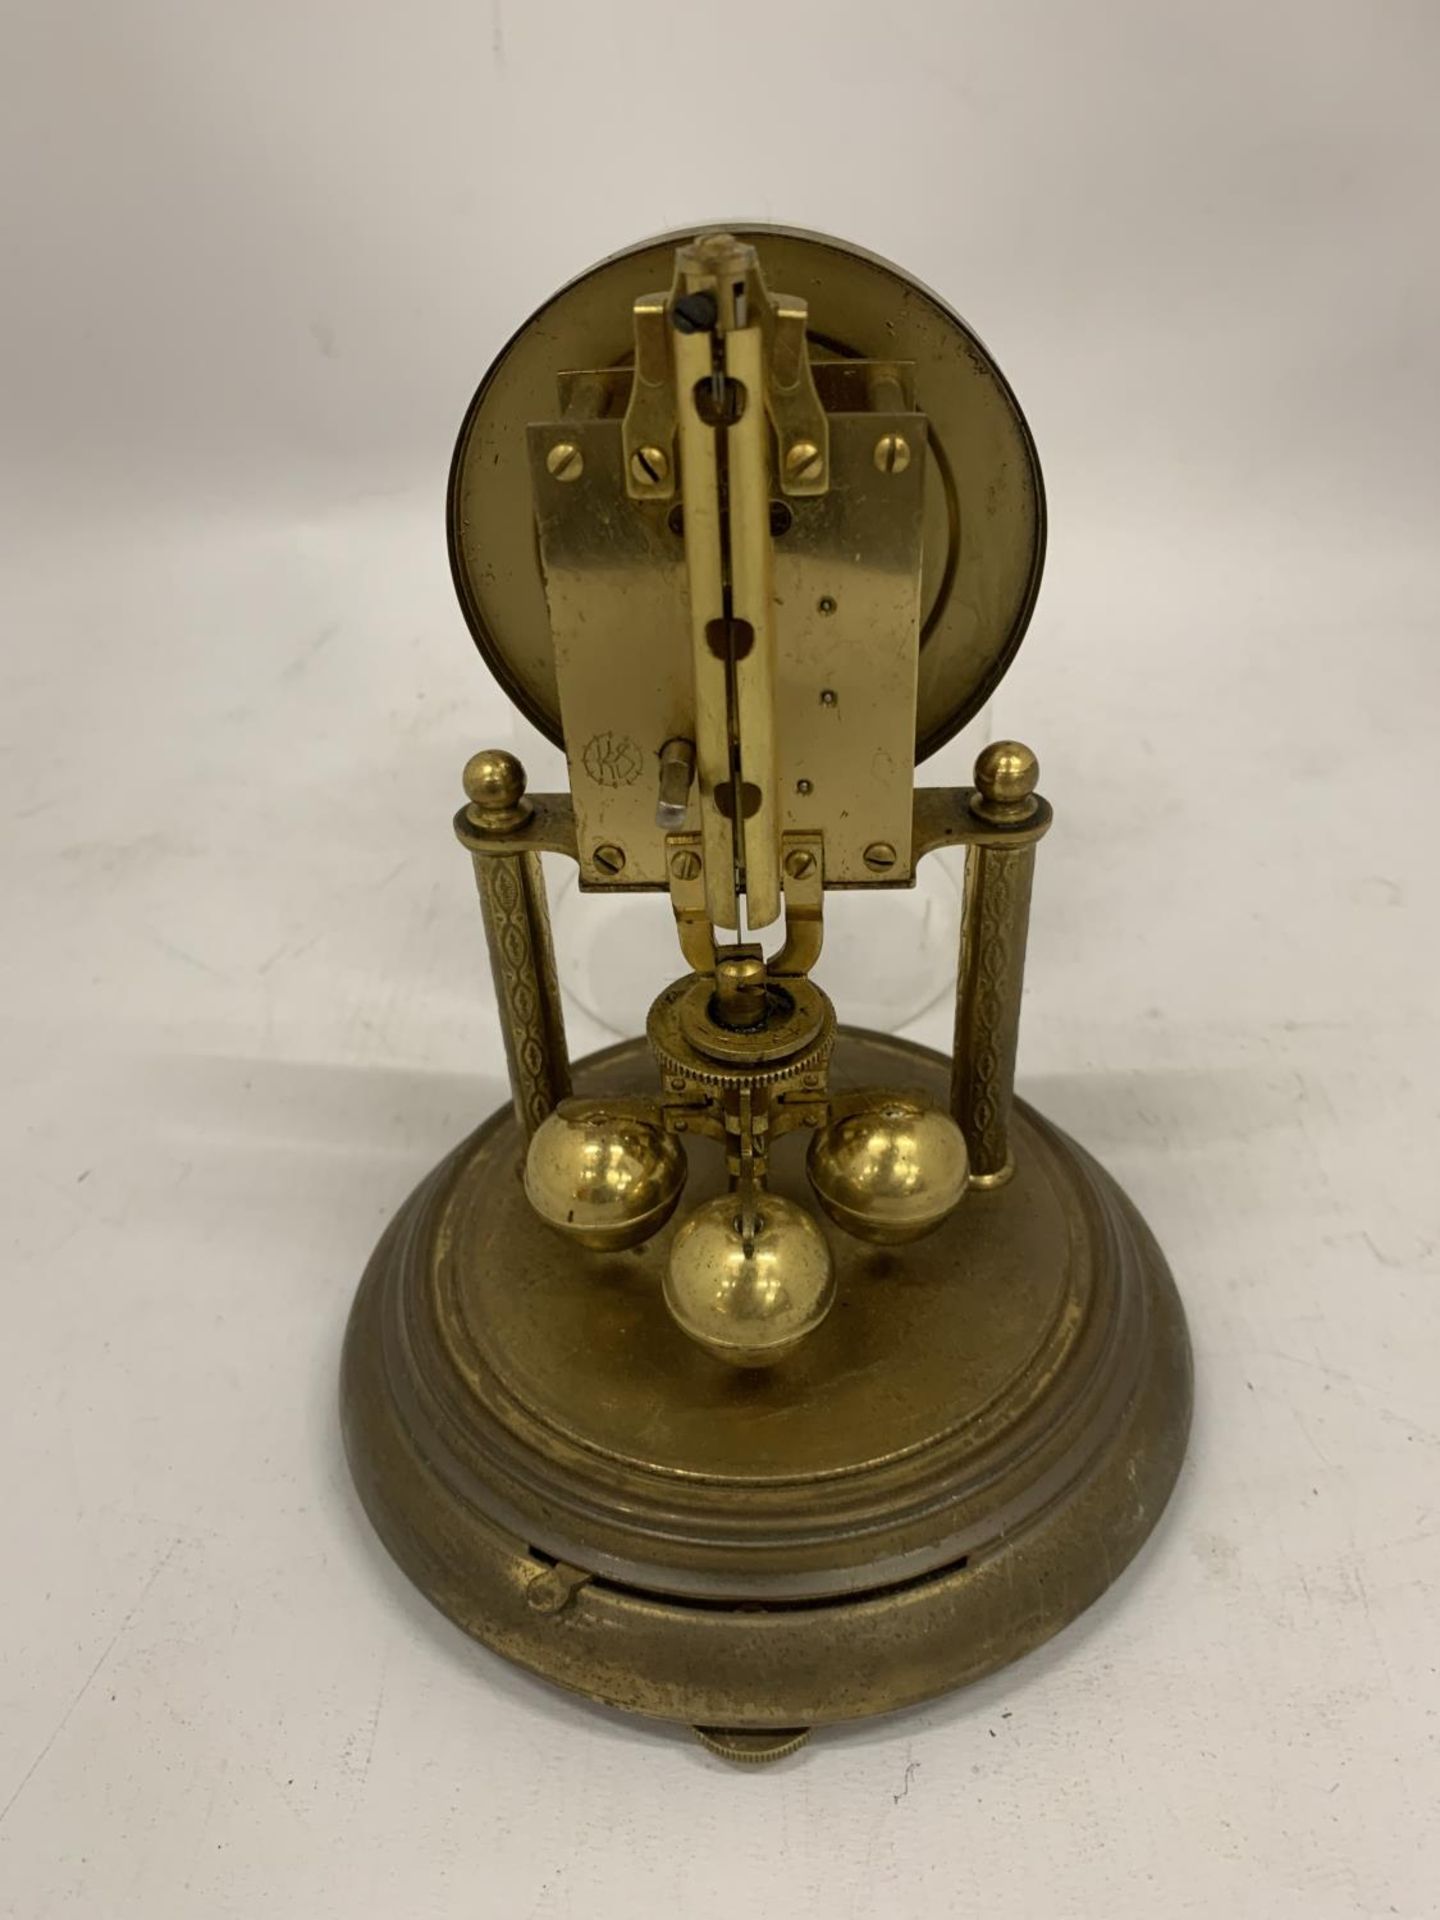 A BRASS ANNIVERSARY CLOCK WITH A DOME - Image 3 of 4